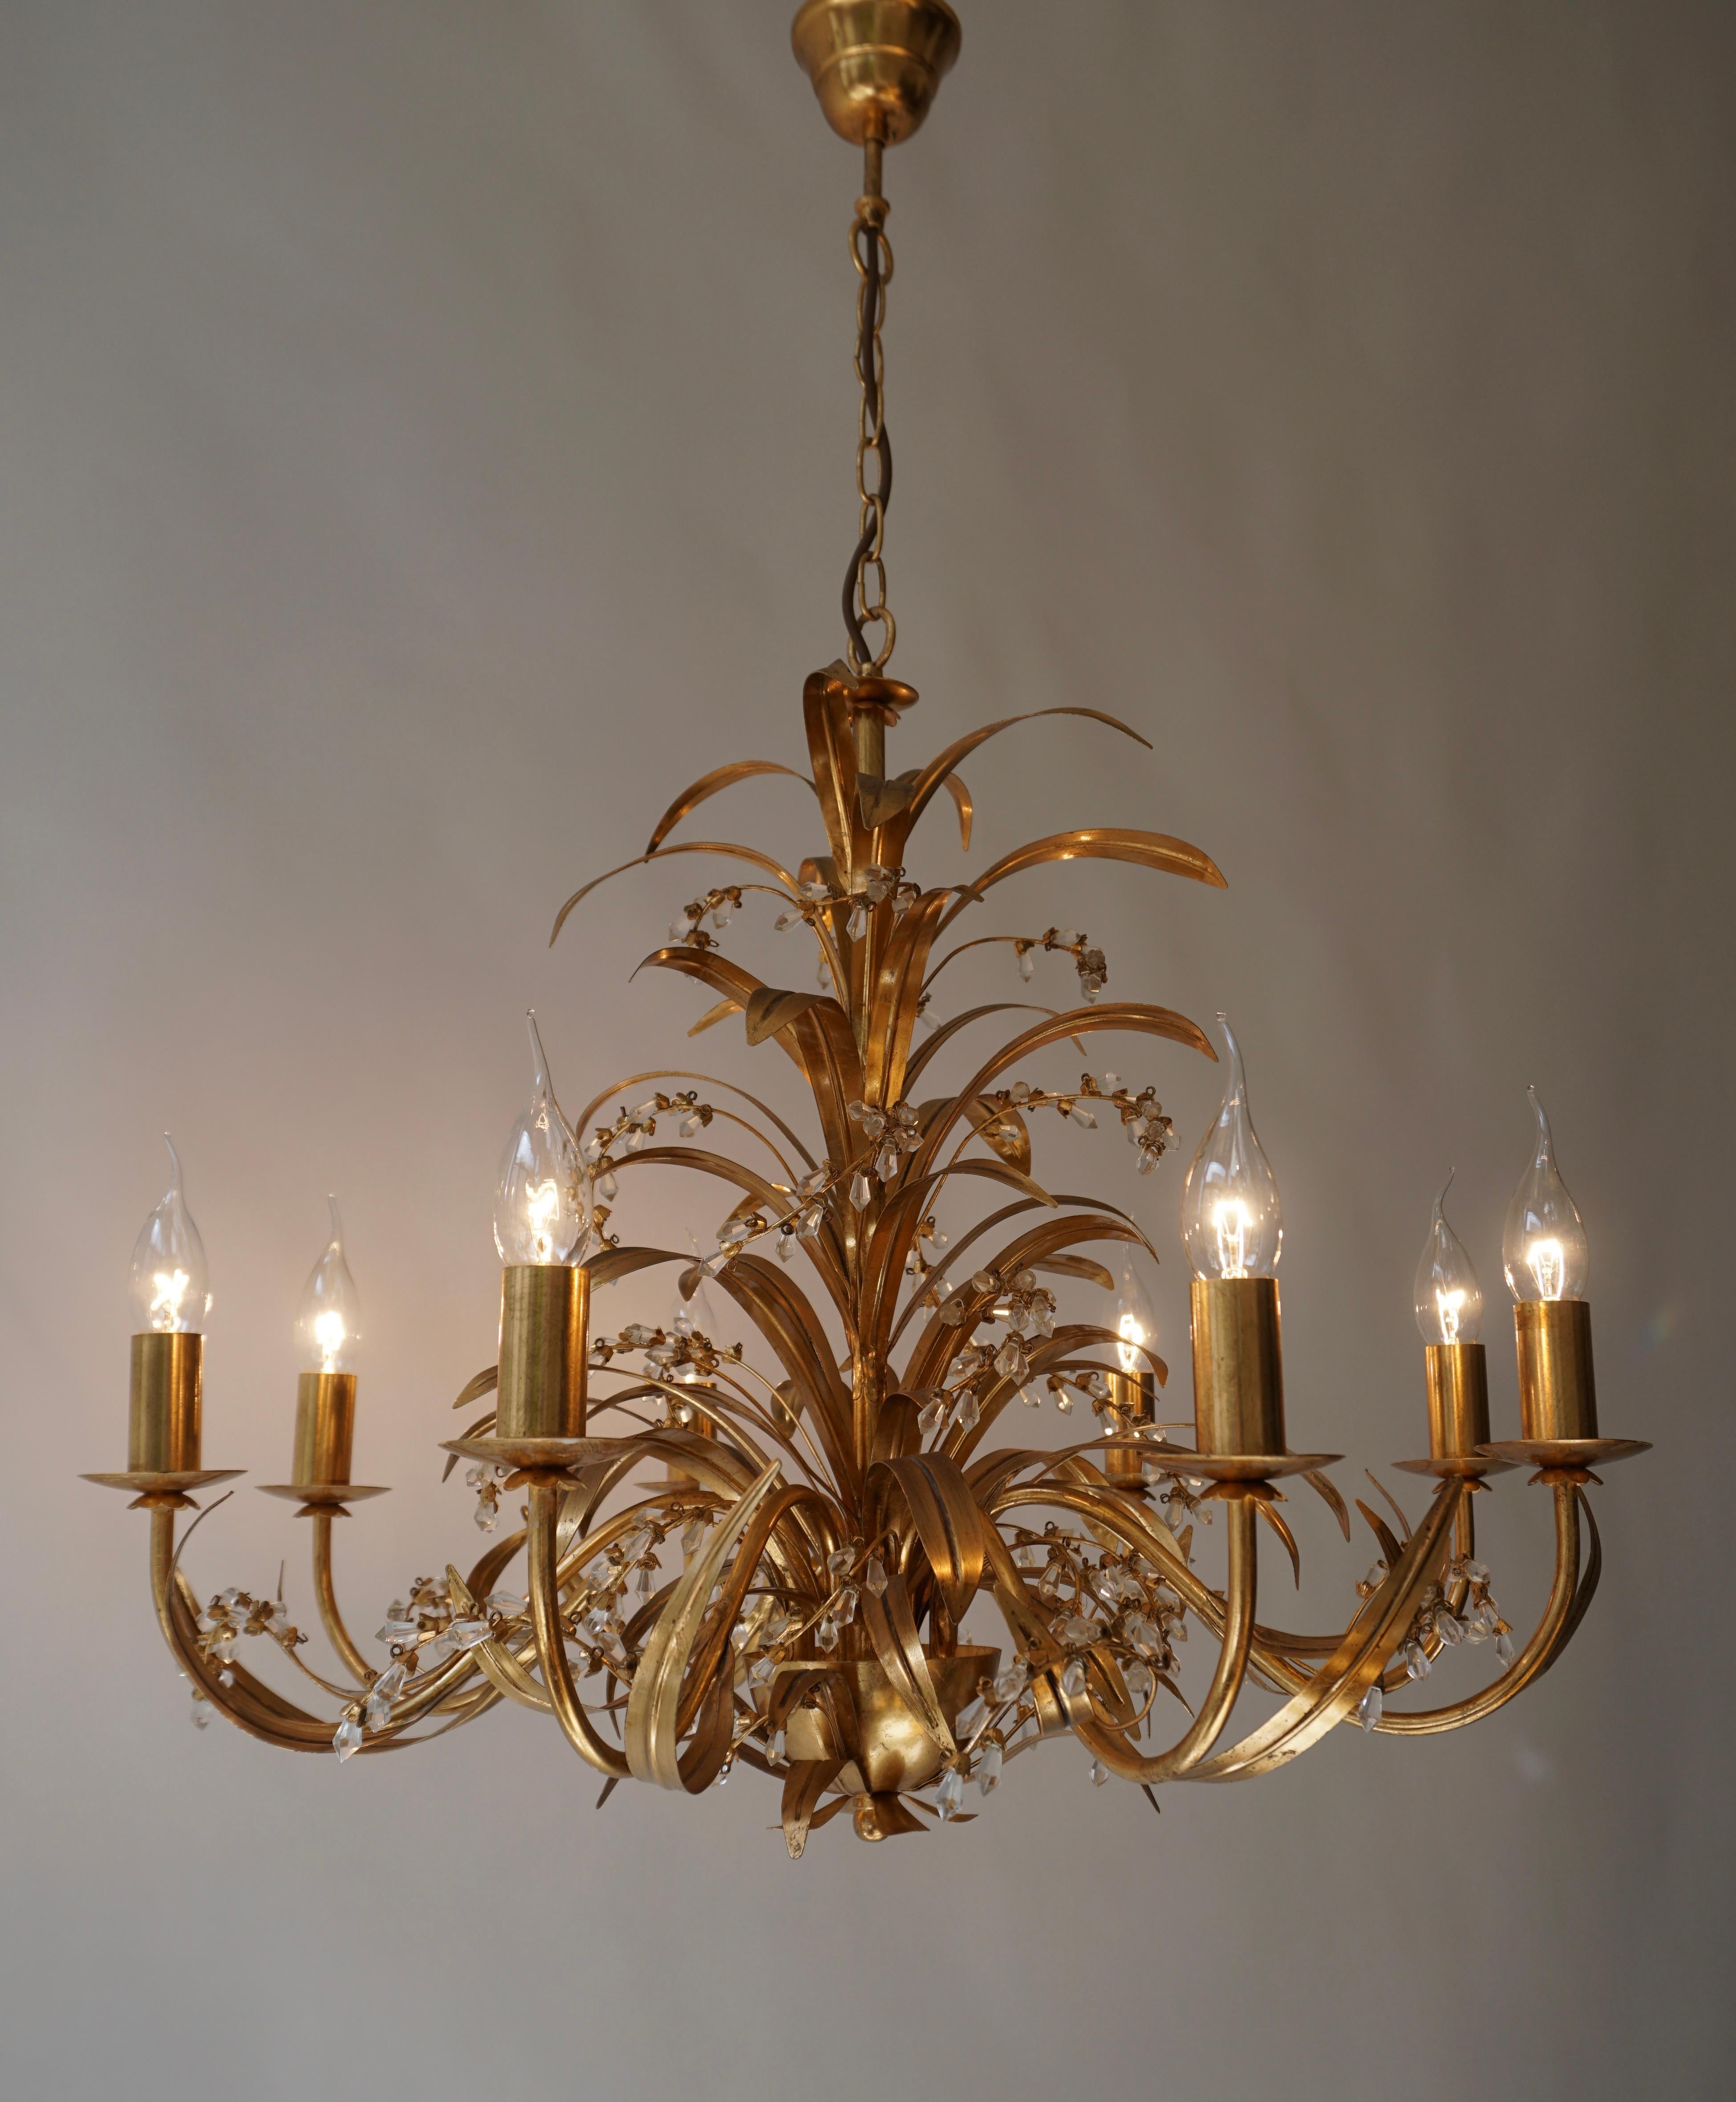 A Hollywood Regency style five-light gilt metal chandelier with tôle palm fronds and crystal glass decoration. Attributed to Hans Kögl and made in Italy. Original candle covers and canopy. In working order. Very good original vintage condition.